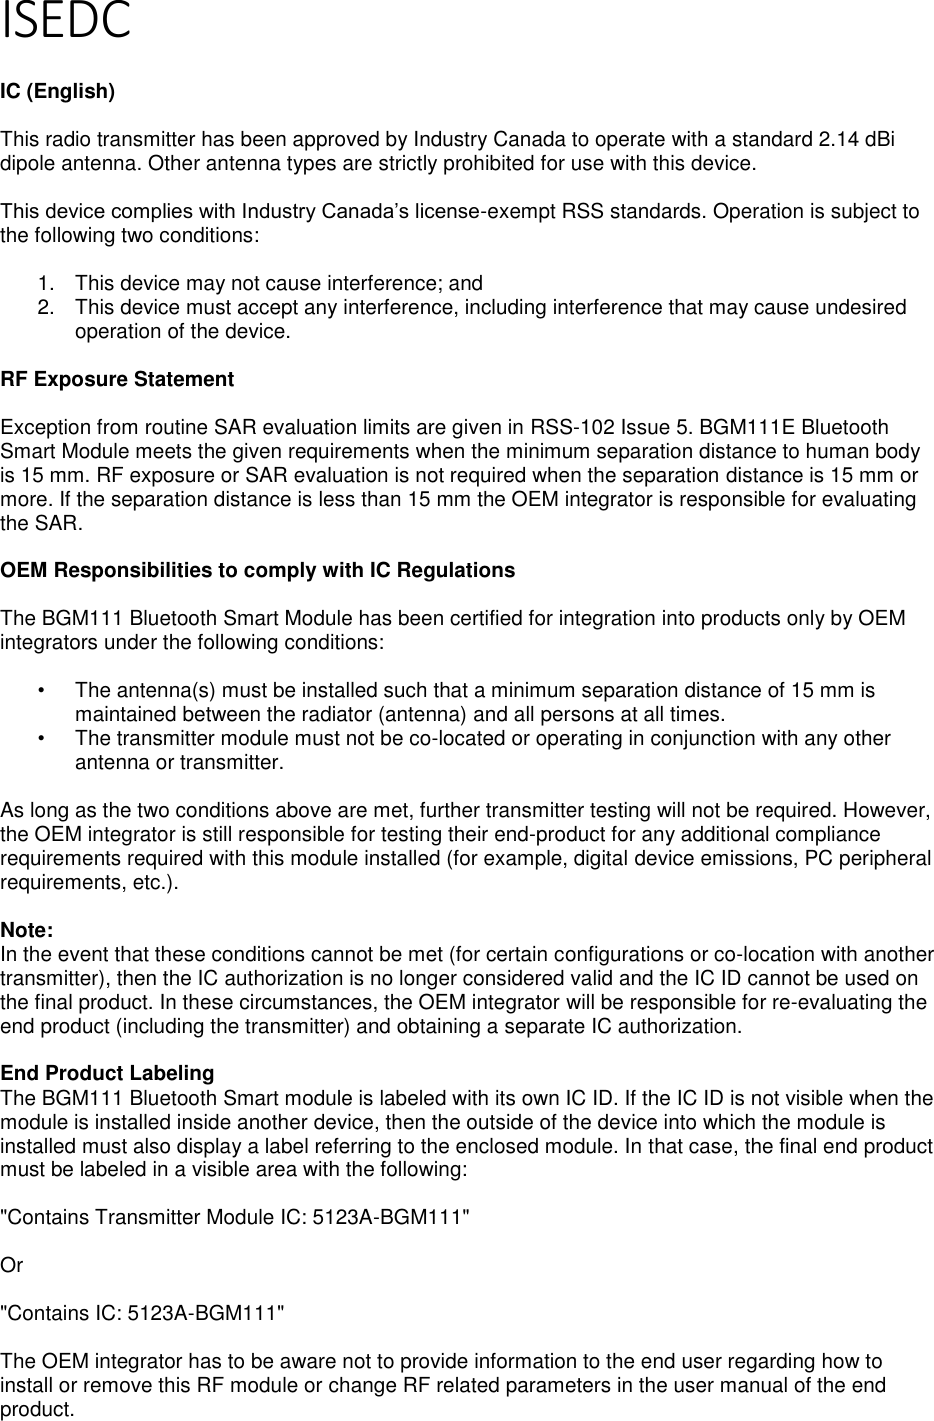 Page 5 of 7 ISEDC  IC (English)  This radio transmitter has been approved by Industry Canada to operate with a standard 2.14 dBi dipole antenna. Other antenna types are strictly prohibited for use with this device.  This device complies with Industry Canada’s license-exempt RSS standards. Operation is subject to the following two conditions:  1.  This device may not cause interference; and 2.  This device must accept any interference, including interference that may cause undesired operation of the device.  RF Exposure Statement  Exception from routine SAR evaluation limits are given in RSS-102 Issue 5. BGM111E Bluetooth Smart Module meets the given requirements when the minimum separation distance to human body is 15 mm. RF exposure or SAR evaluation is not required when the separation distance is 15 mm or more. If the separation distance is less than 15 mm the OEM integrator is responsible for evaluating the SAR.  OEM Responsibilities to comply with IC Regulations  The BGM111 Bluetooth Smart Module has been certified for integration into products only by OEM integrators under the following conditions:  •  The antenna(s) must be installed such that a minimum separation distance of 15 mm is maintained between the radiator (antenna) and all persons at all times. •  The transmitter module must not be co-located or operating in conjunction with any other antenna or transmitter.  As long as the two conditions above are met, further transmitter testing will not be required. However, the OEM integrator is still responsible for testing their end-product for any additional compliance requirements required with this module installed (for example, digital device emissions, PC peripheral requirements, etc.).  Note:  In the event that these conditions cannot be met (for certain configurations or co-location with another transmitter), then the IC authorization is no longer considered valid and the IC ID cannot be used on the final product. In these circumstances, the OEM integrator will be responsible for re-evaluating the end product (including the transmitter) and obtaining a separate IC authorization.  End Product Labeling The BGM111 Bluetooth Smart module is labeled with its own IC ID. If the IC ID is not visible when the module is installed inside another device, then the outside of the device into which the module is installed must also display a label referring to the enclosed module. In that case, the final end product must be labeled in a visible area with the following:  &quot;Contains Transmitter Module IC: 5123A-BGM111&quot;  Or  &quot;Contains IC: 5123A-BGM111&quot;  The OEM integrator has to be aware not to provide information to the end user regarding how to install or remove this RF module or change RF related parameters in the user manual of the end product. 